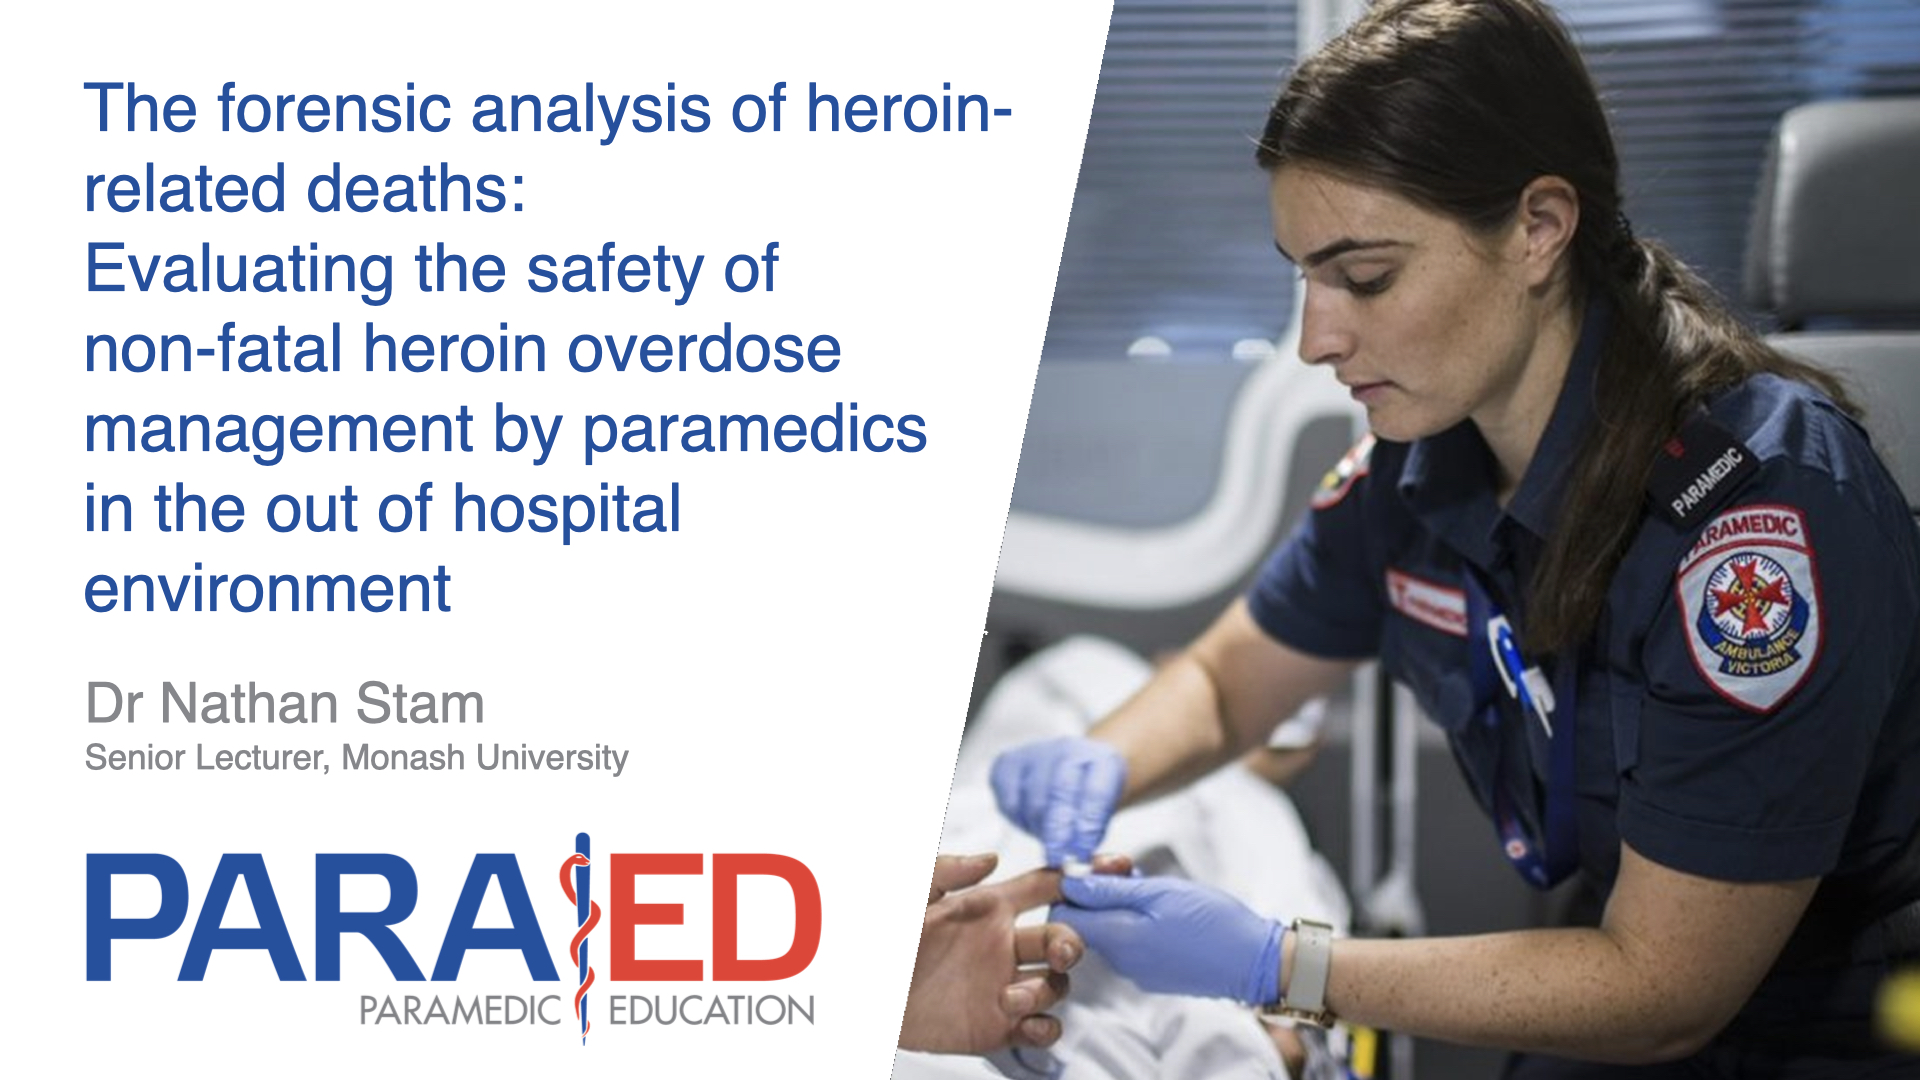 The forensic analysis of heroin-related deaths: evaluating the safety of non-fatal heroin overdose management by paramedics in the out of hospital environment